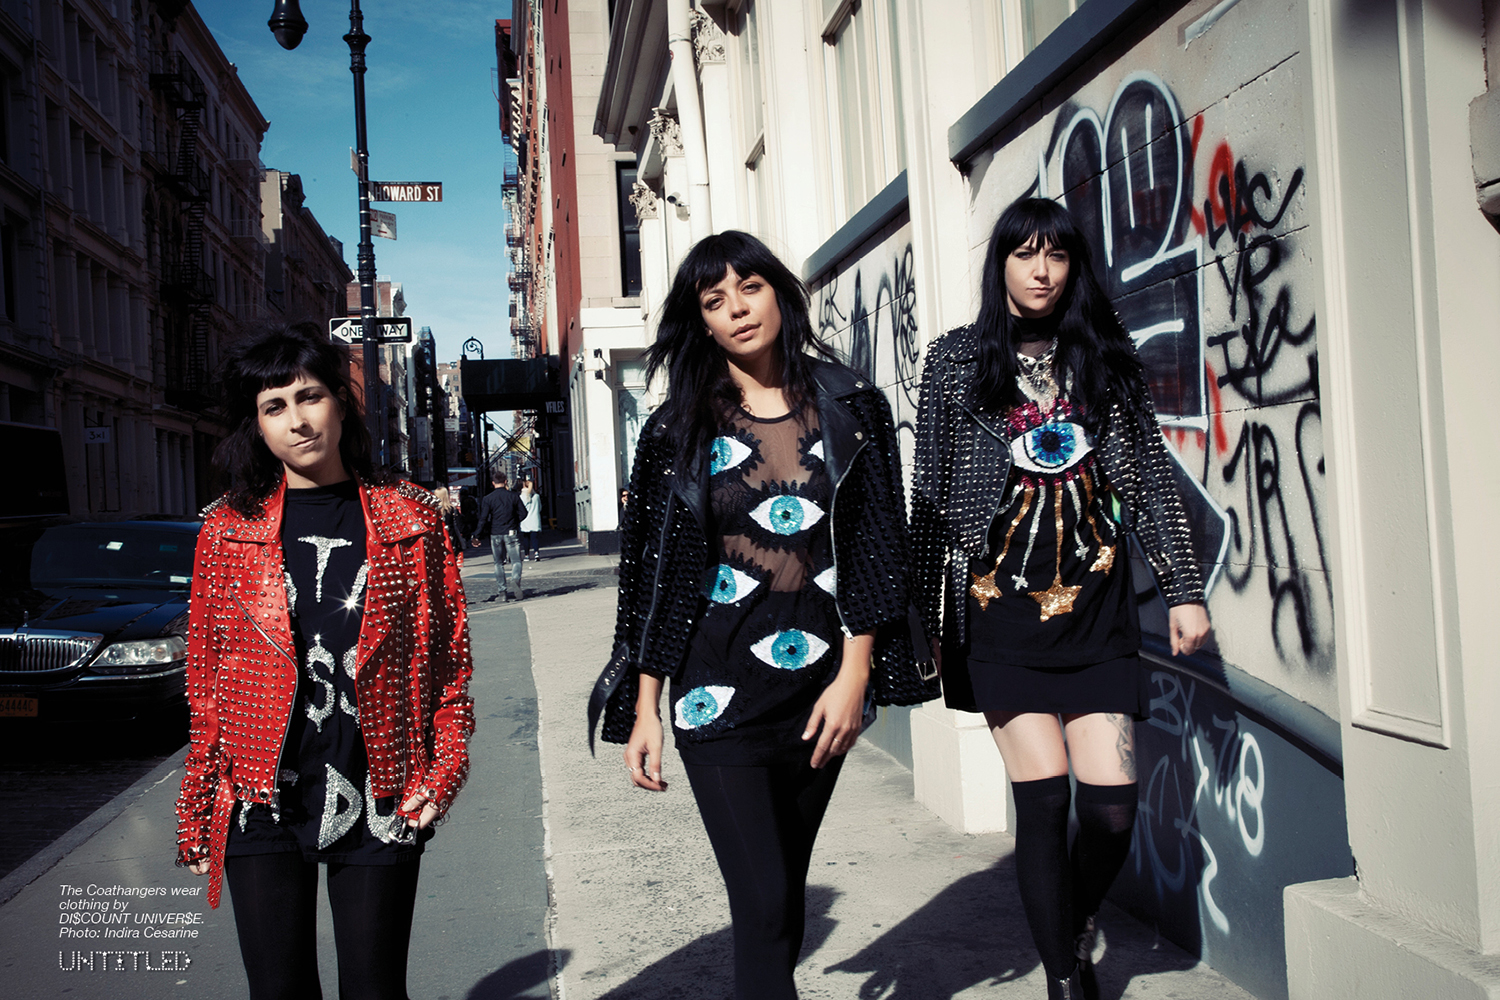 FROM NEW YORK TO LA WITH PUNK TRIO THE COATHANGERS - EXCLUSIVE INTERVIEW